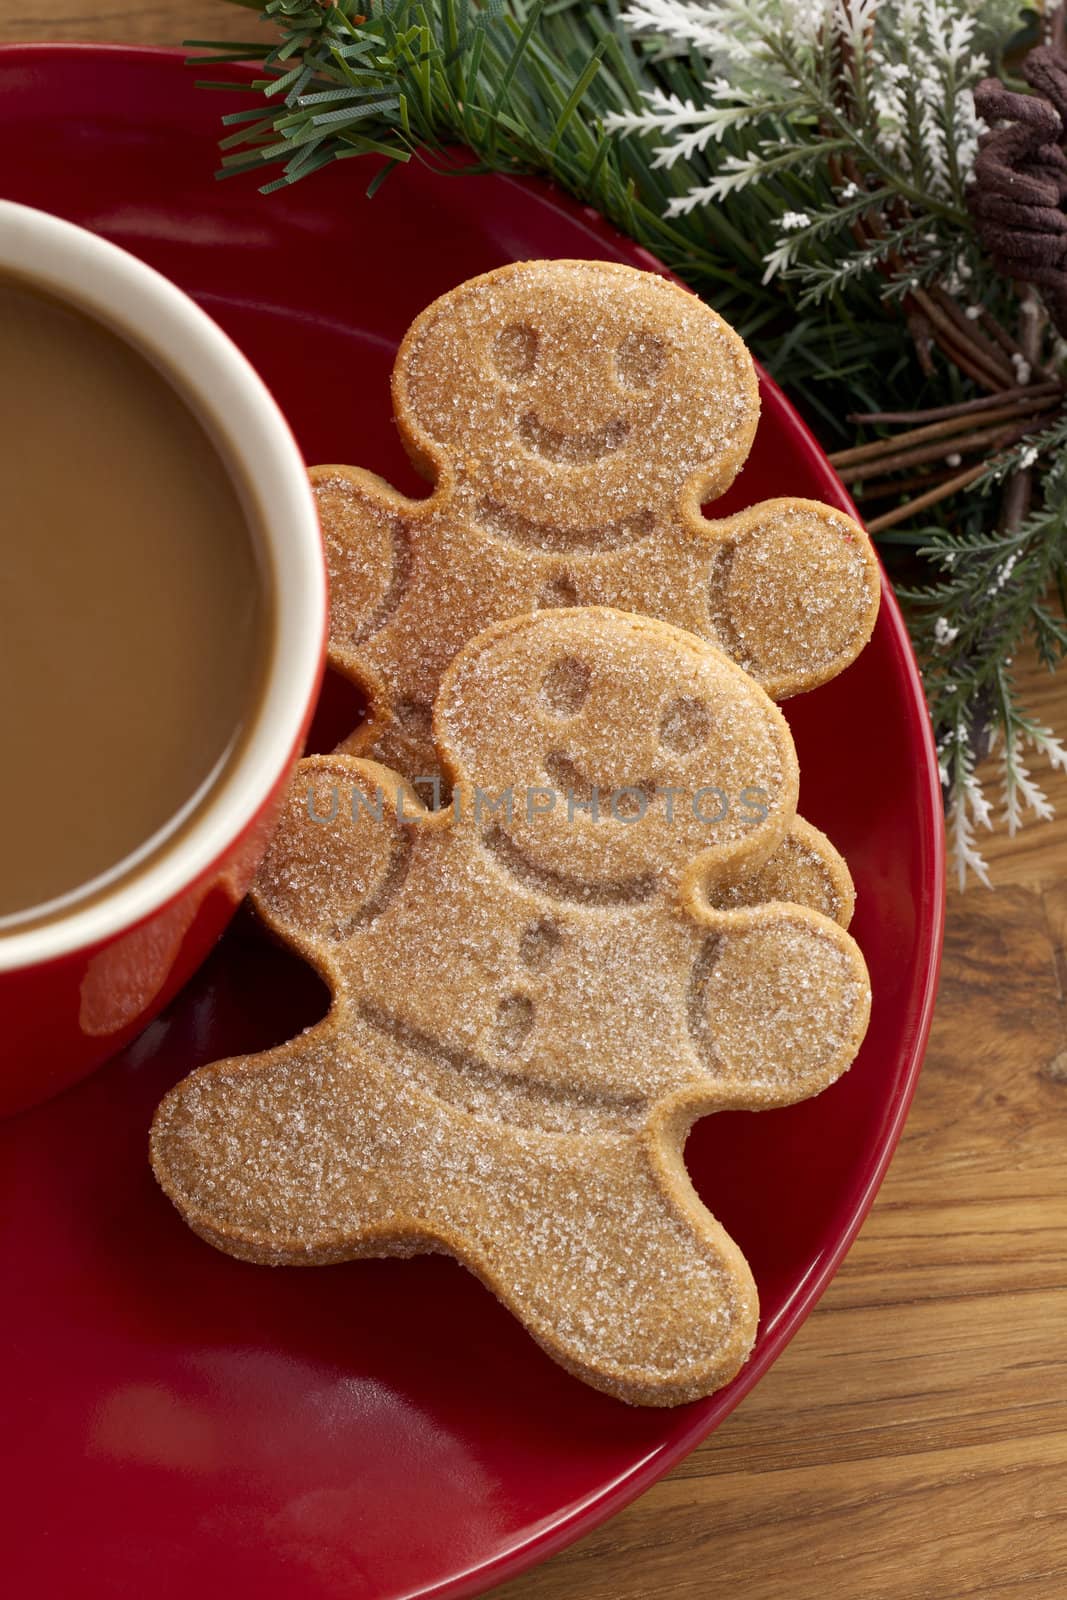 Cropped image gingerbread cookies in red saucer with coffee cup.